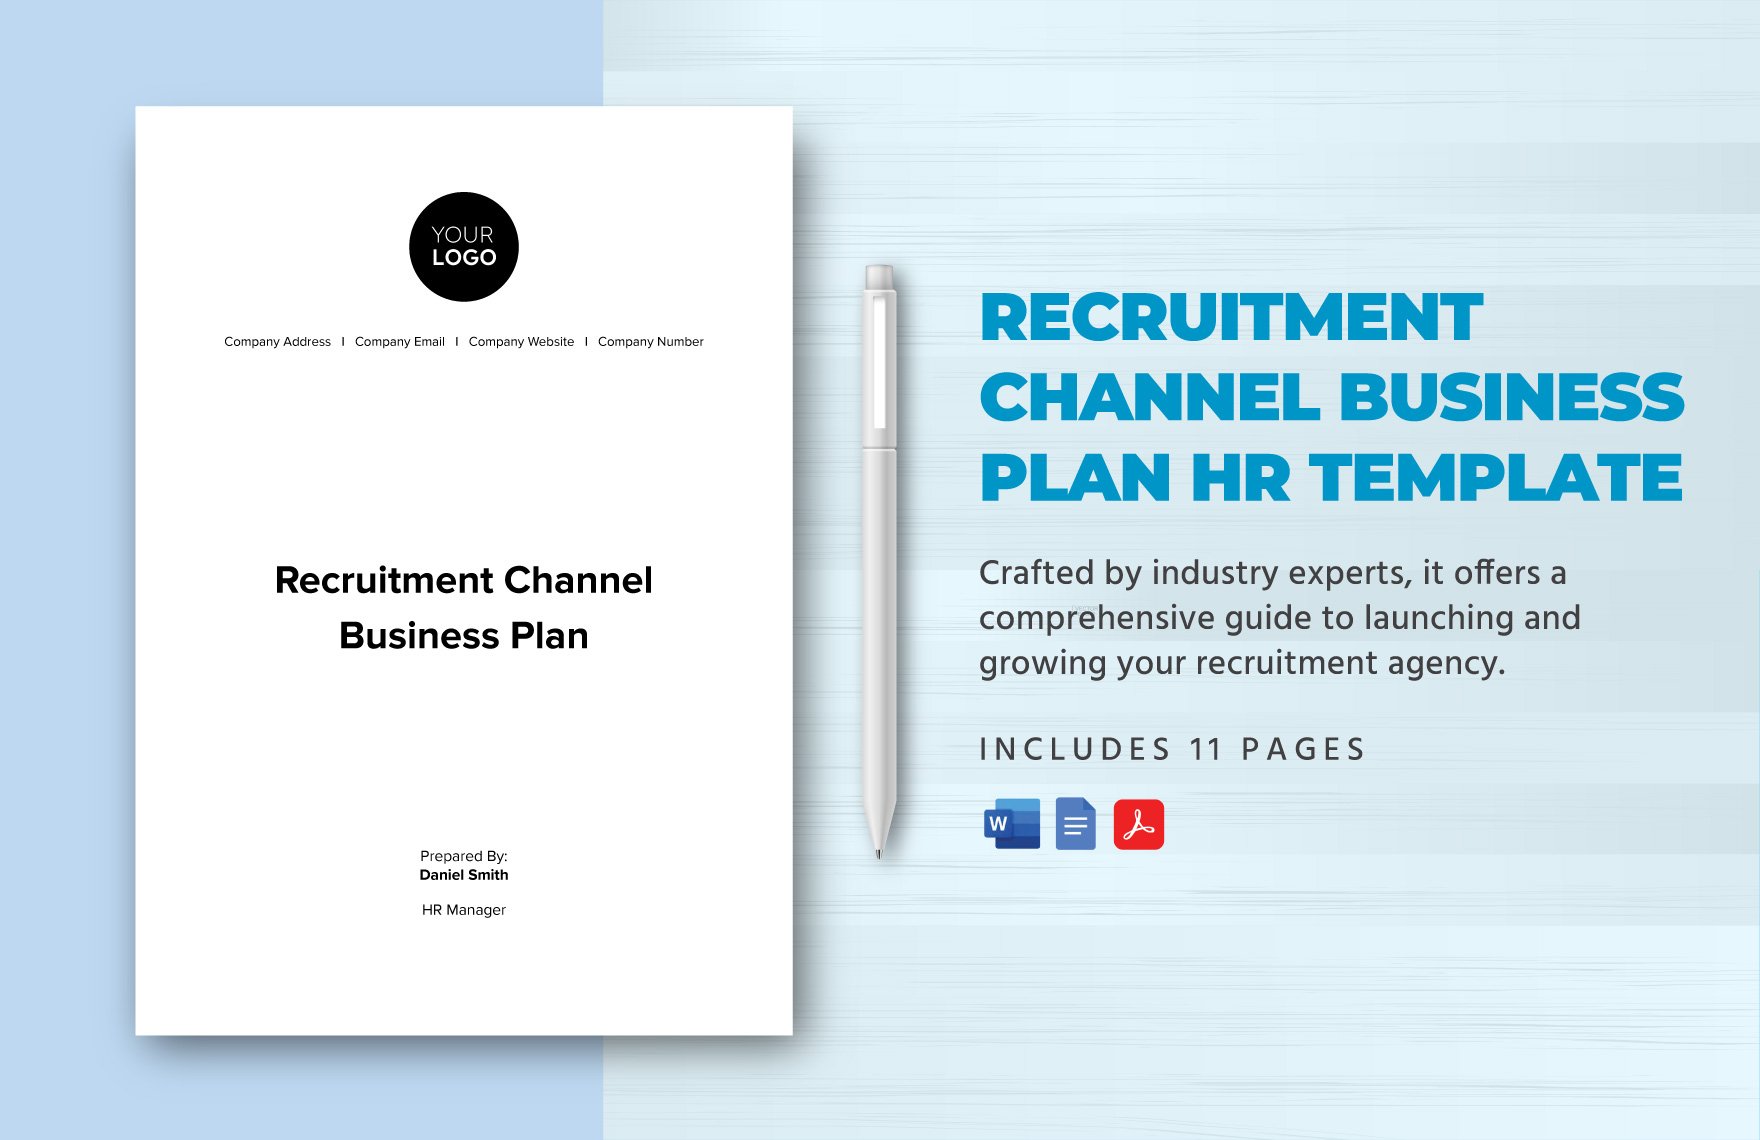 Recruitment Channel Business Plan HR Template in Word, Google Docs, PDF